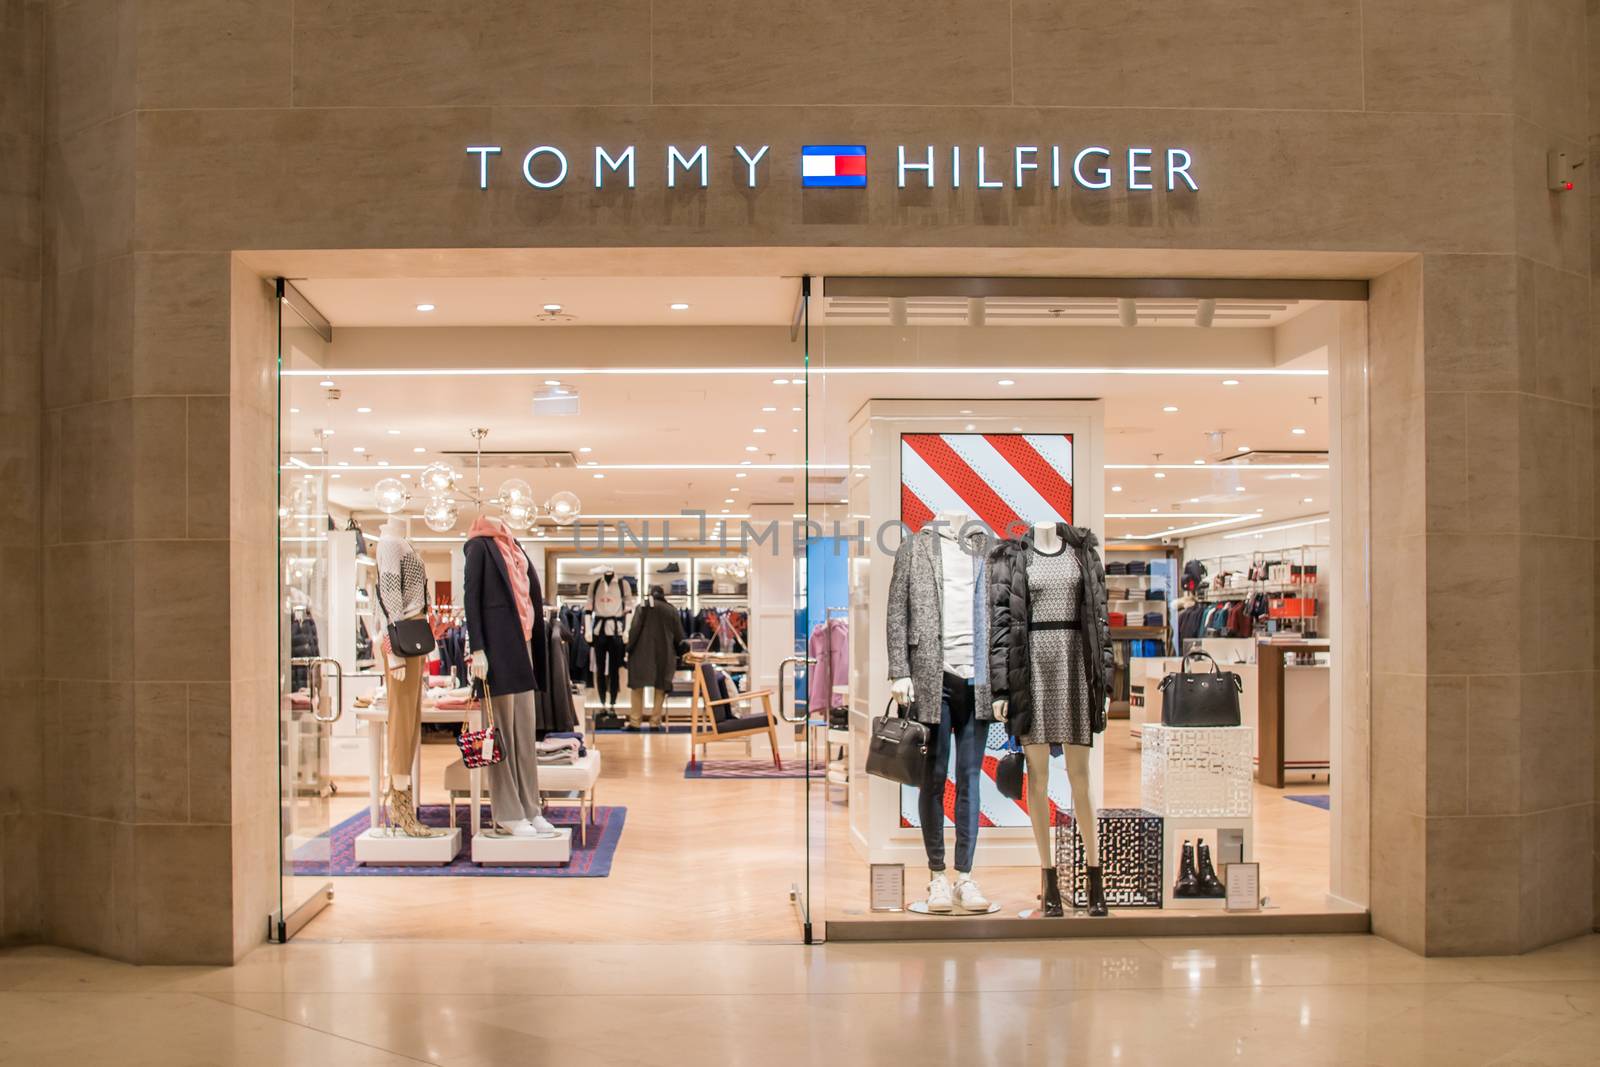 Tommy hilfiger Store in Paris, France, Luxury Clothing brand shop in "Le Louvre"